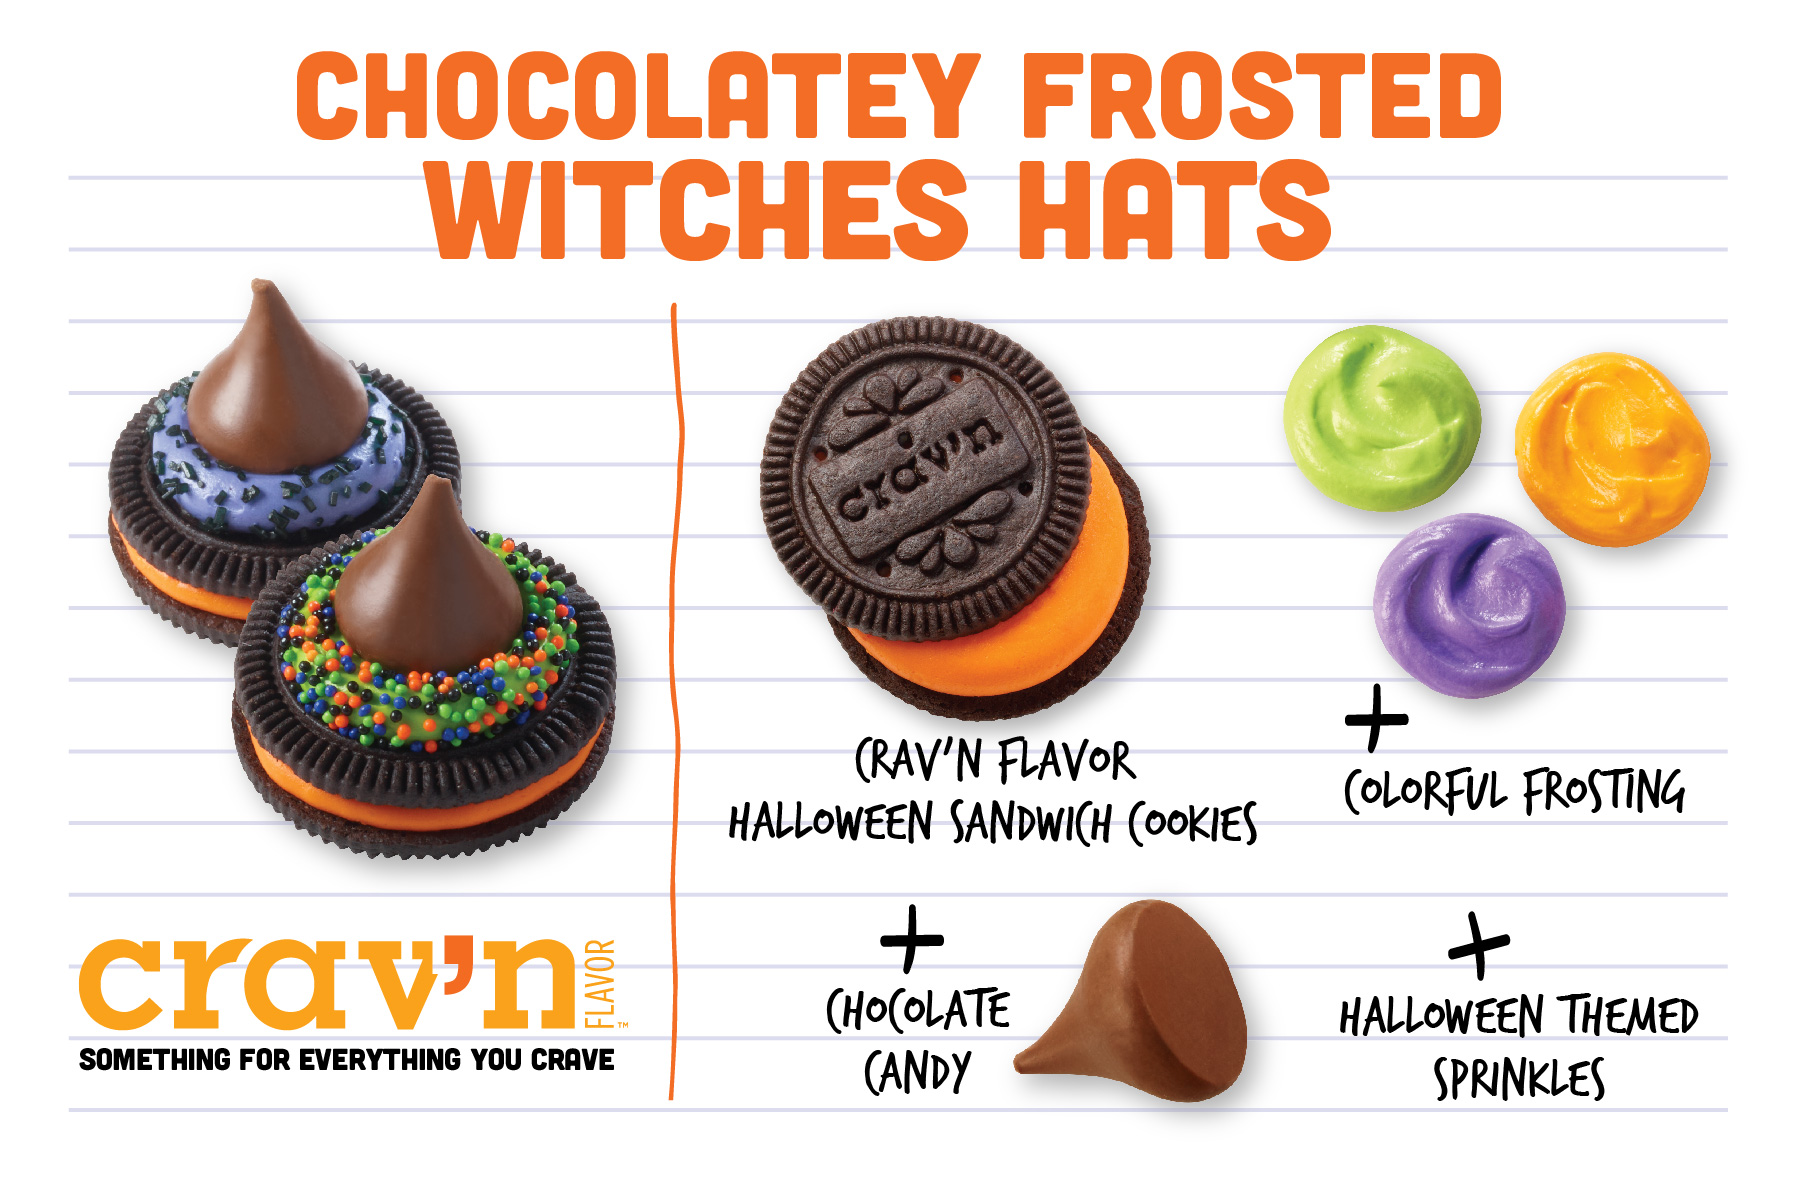 Chocolatey Frosted Witches Hats